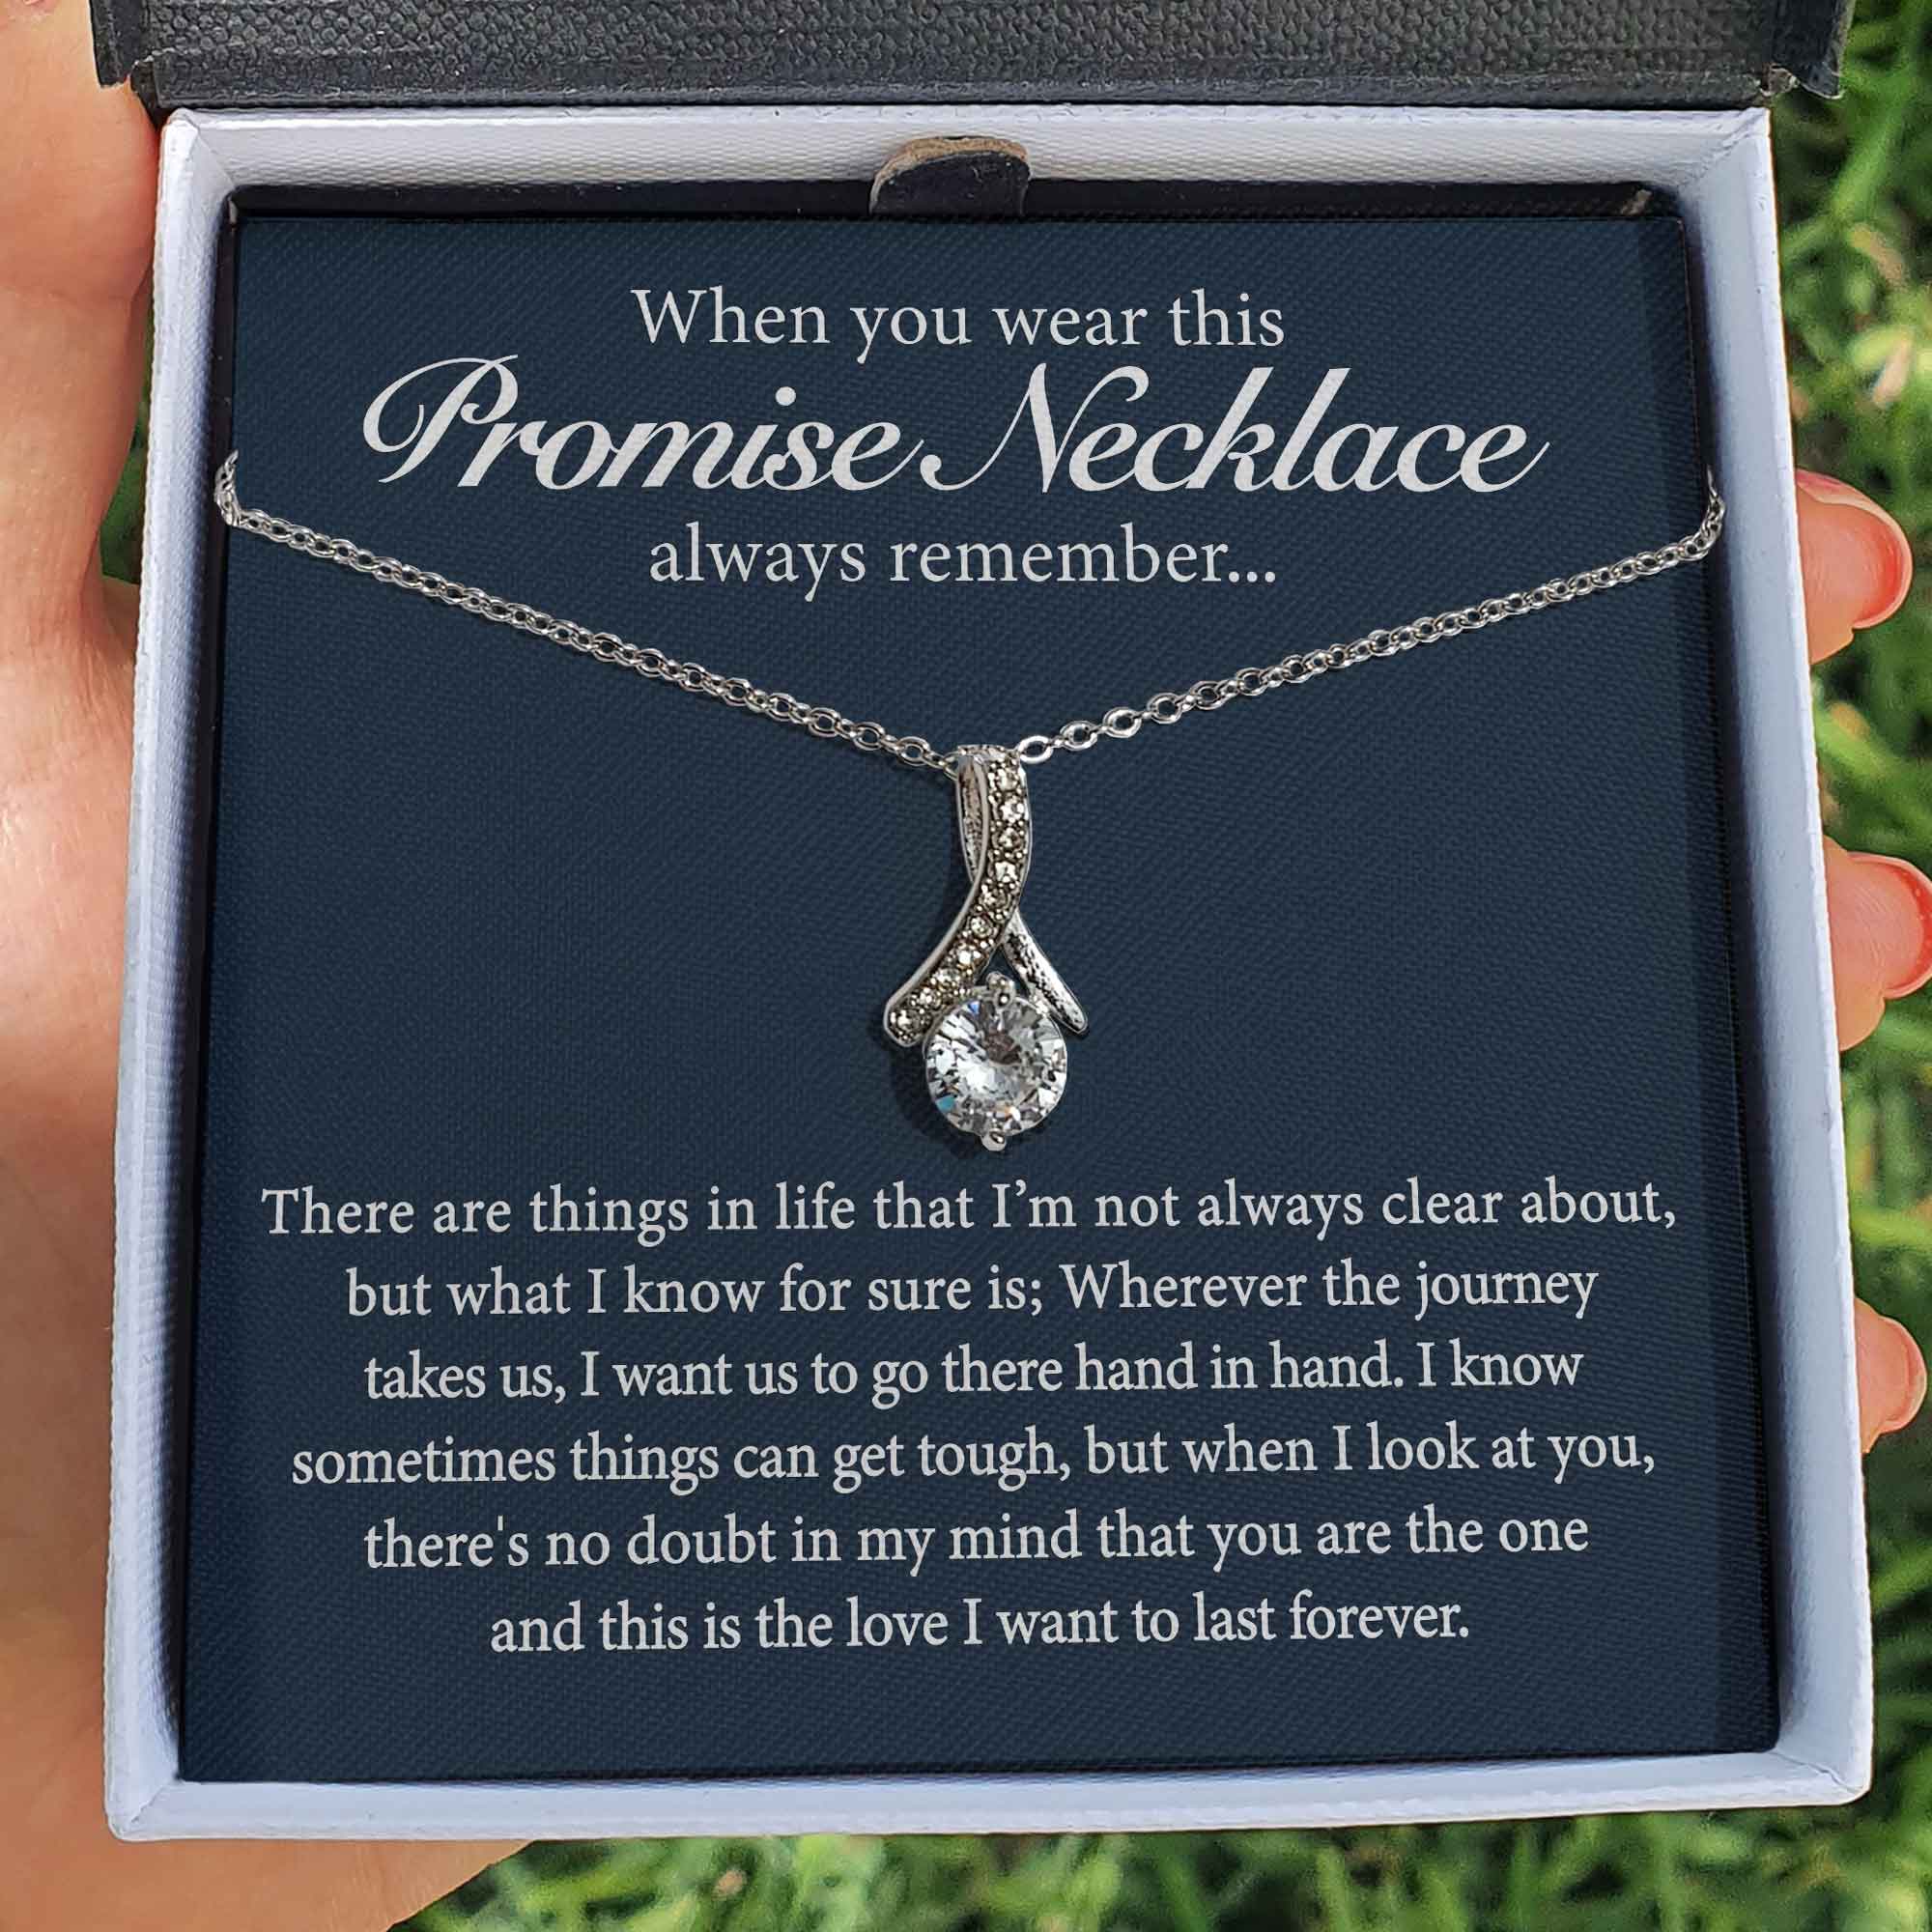 ShineOn Fulfillment Jewelry Standard Box Promise Necklace - When You Wear This Always Remember - Ribbon Necklace